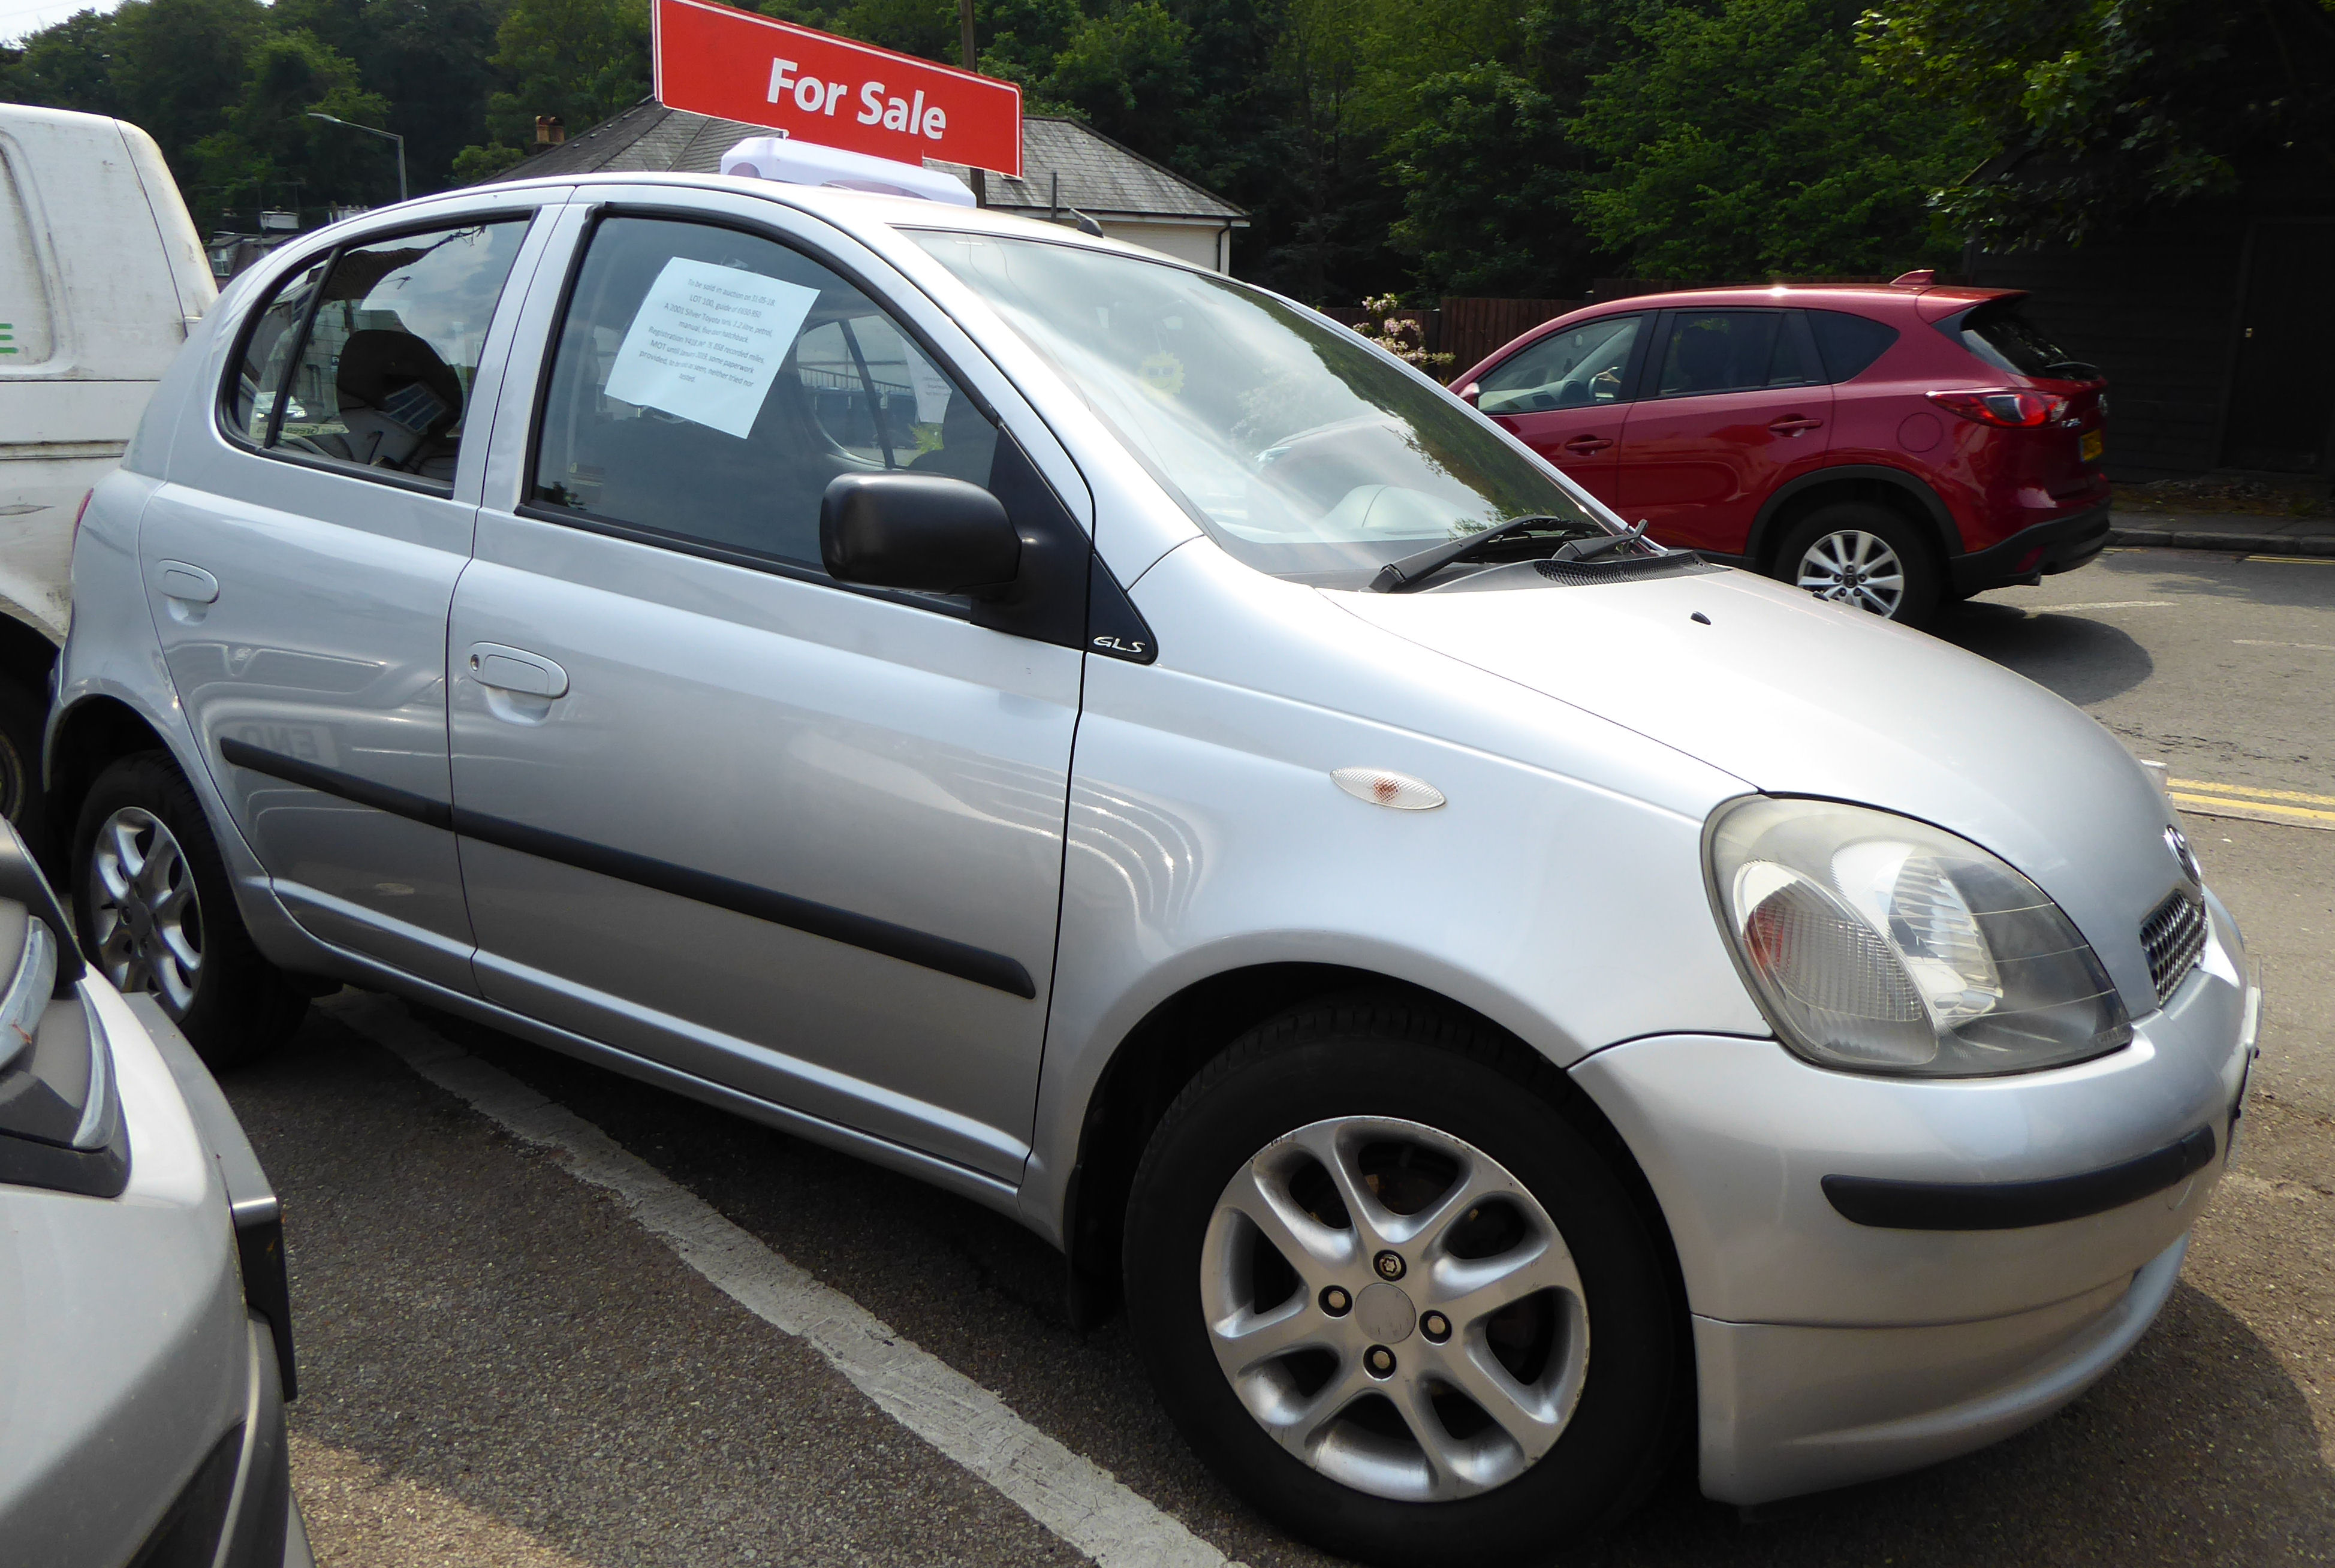 A 2001 silver Toyota Yaris, 1. - Image 2 of 3